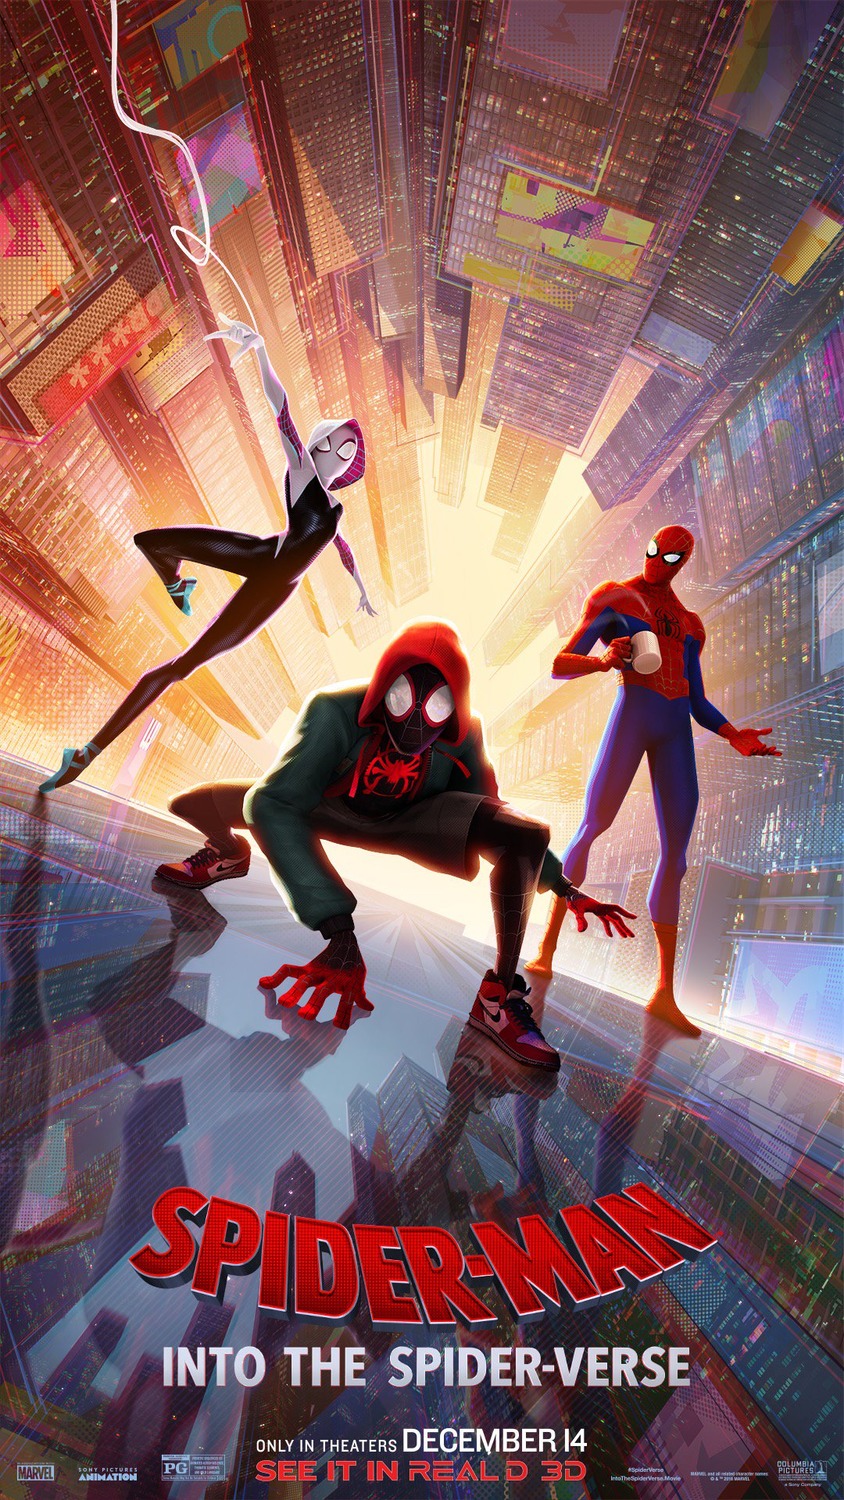 Preorder Spider-Man: Across the Spider-Verse on Prime Video Ahead of August  8 Release - TV Guide